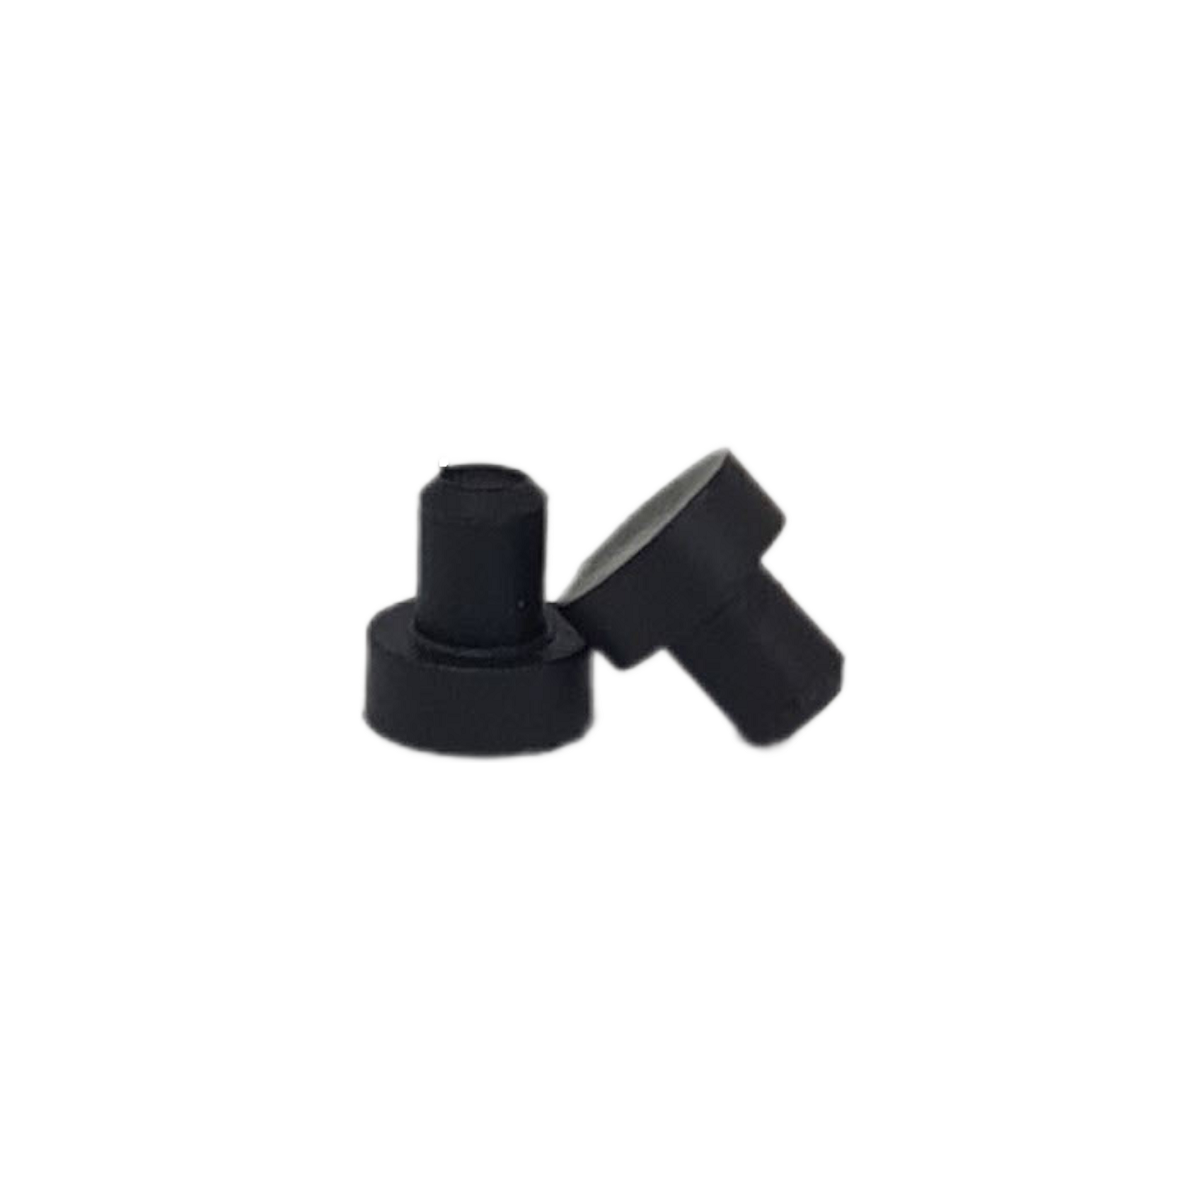 Table Buffer 10 MM - Round (available in black and white color)